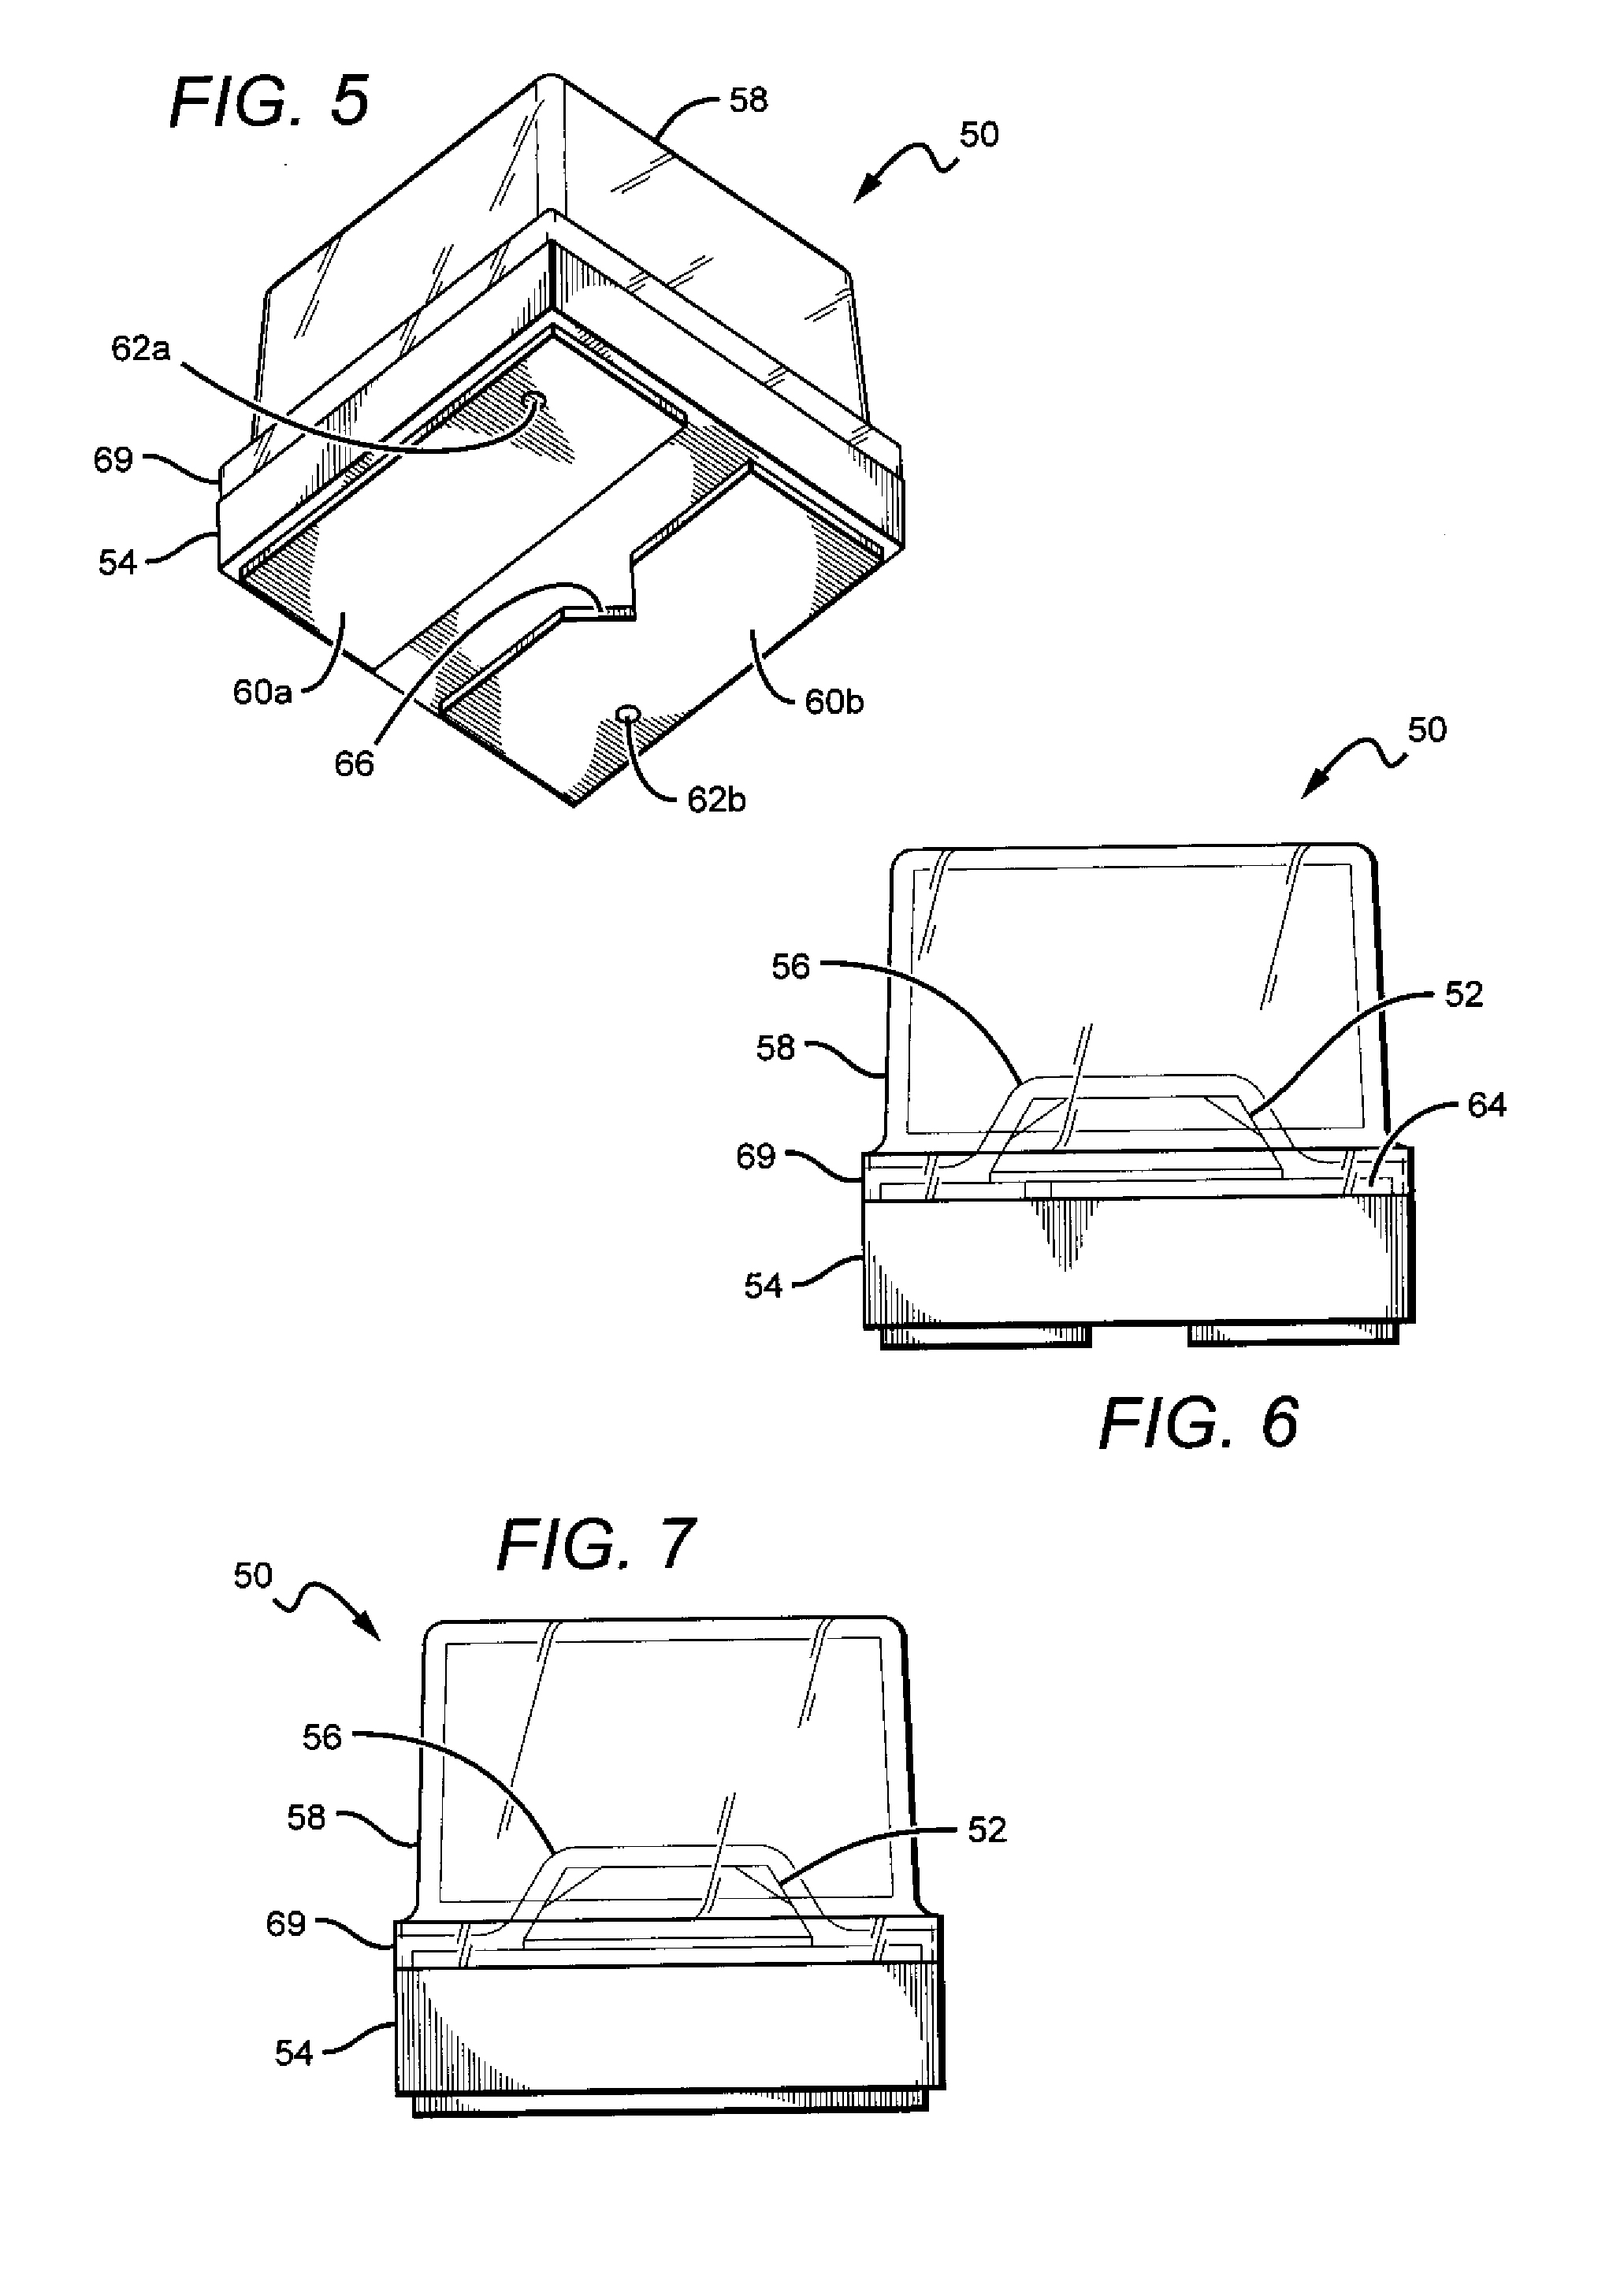 LED package with encapsulant having curved and planar surfaces